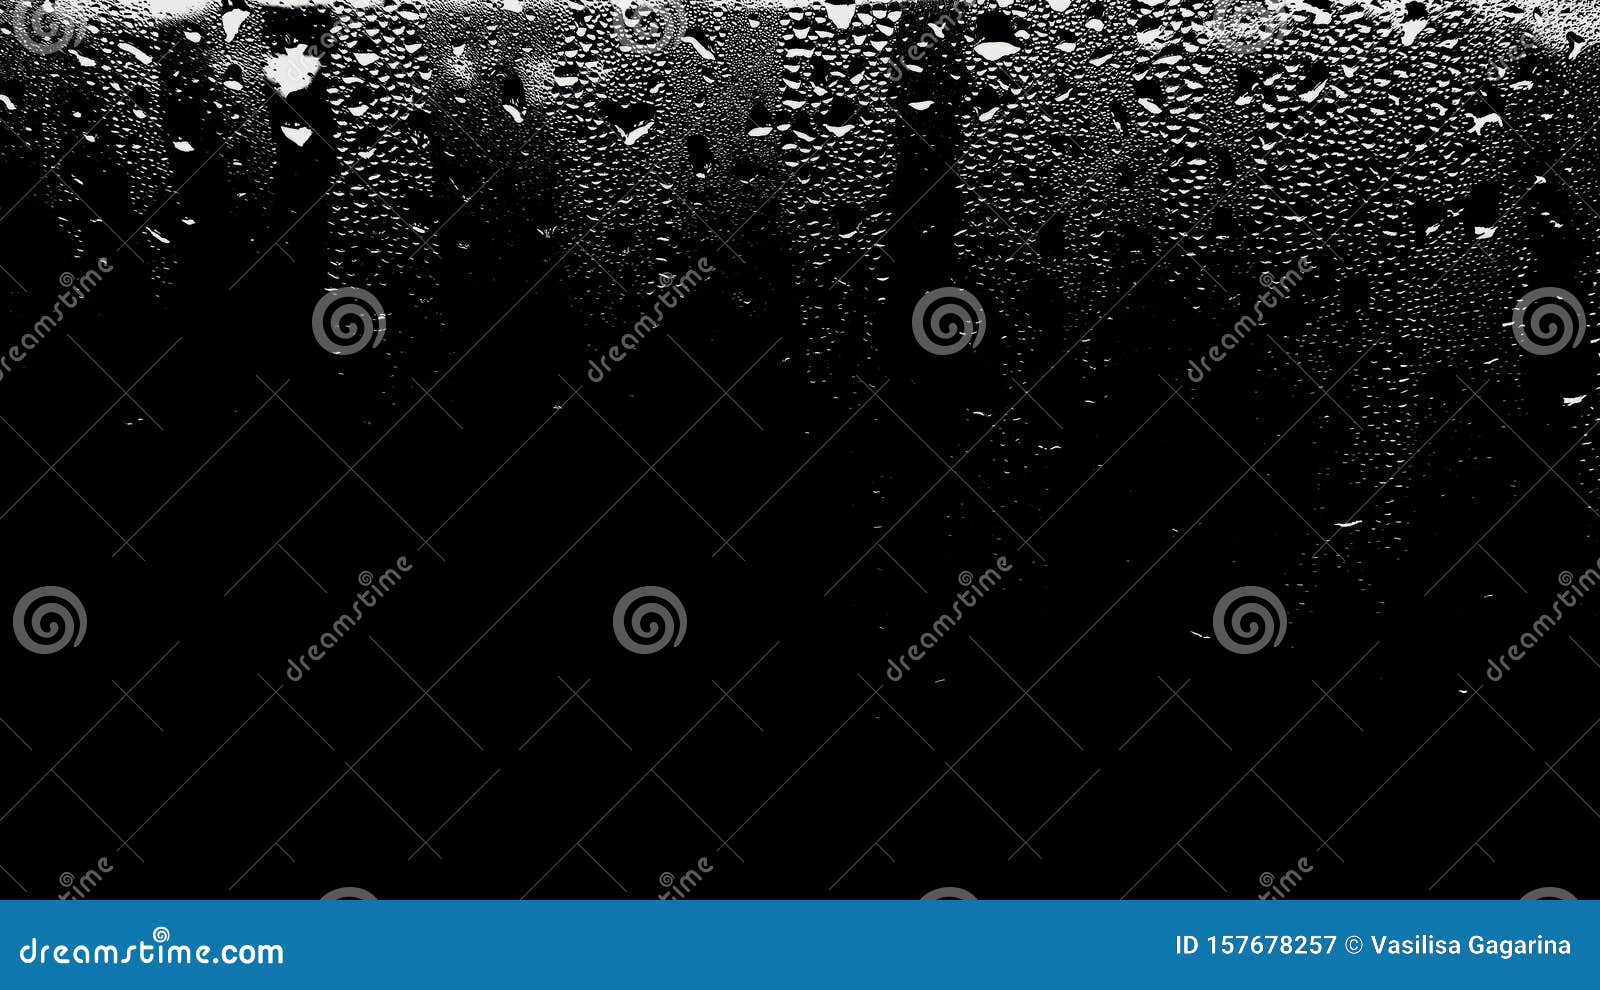 raindrops on the surface of the window panes with a black background. natural rain pattern on the glass. light penetrates through